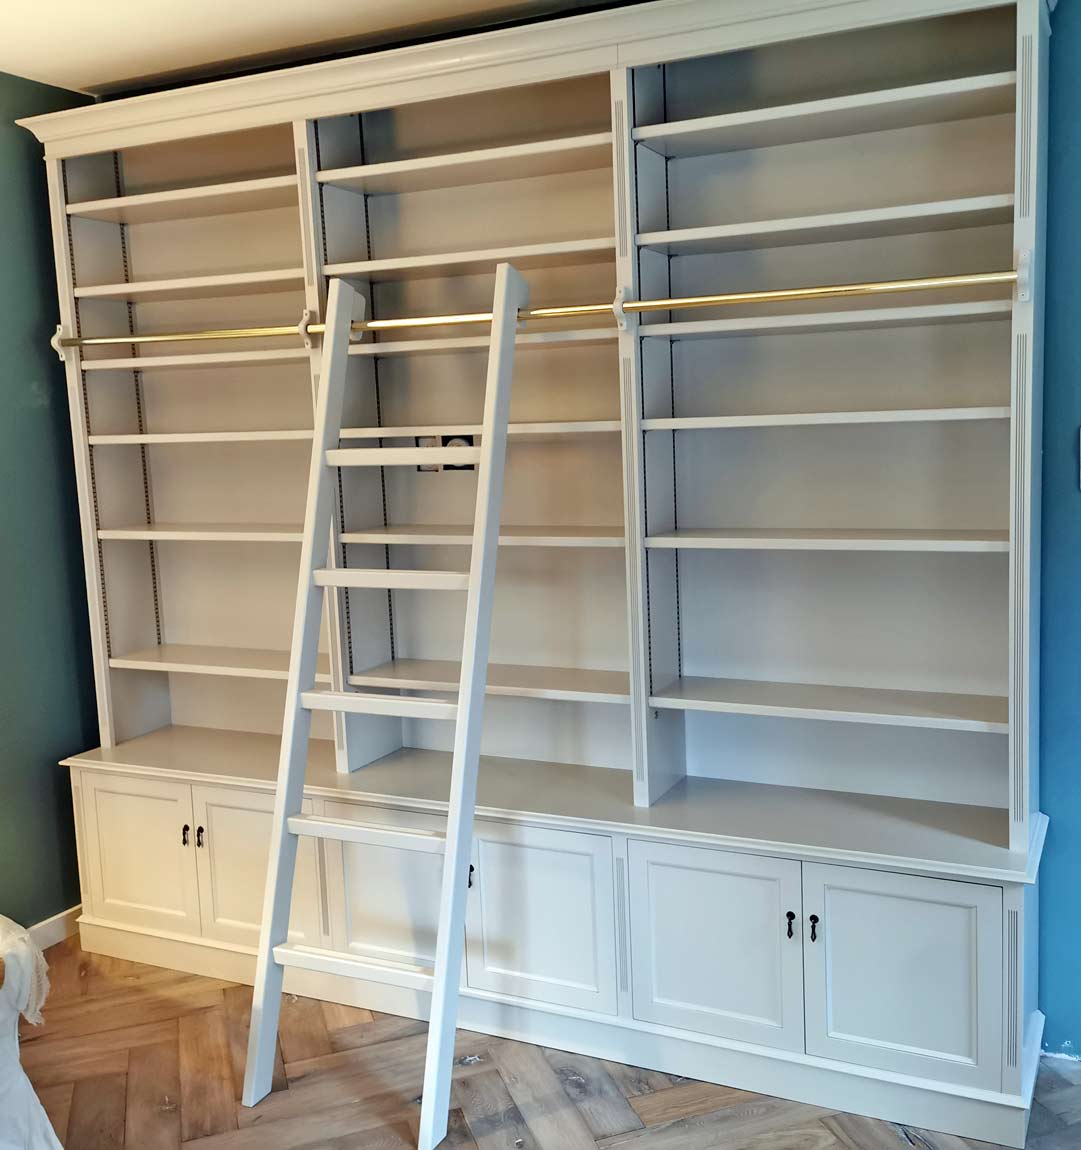 Bespoke bookcase in Farrow and Ball " In the Buff "